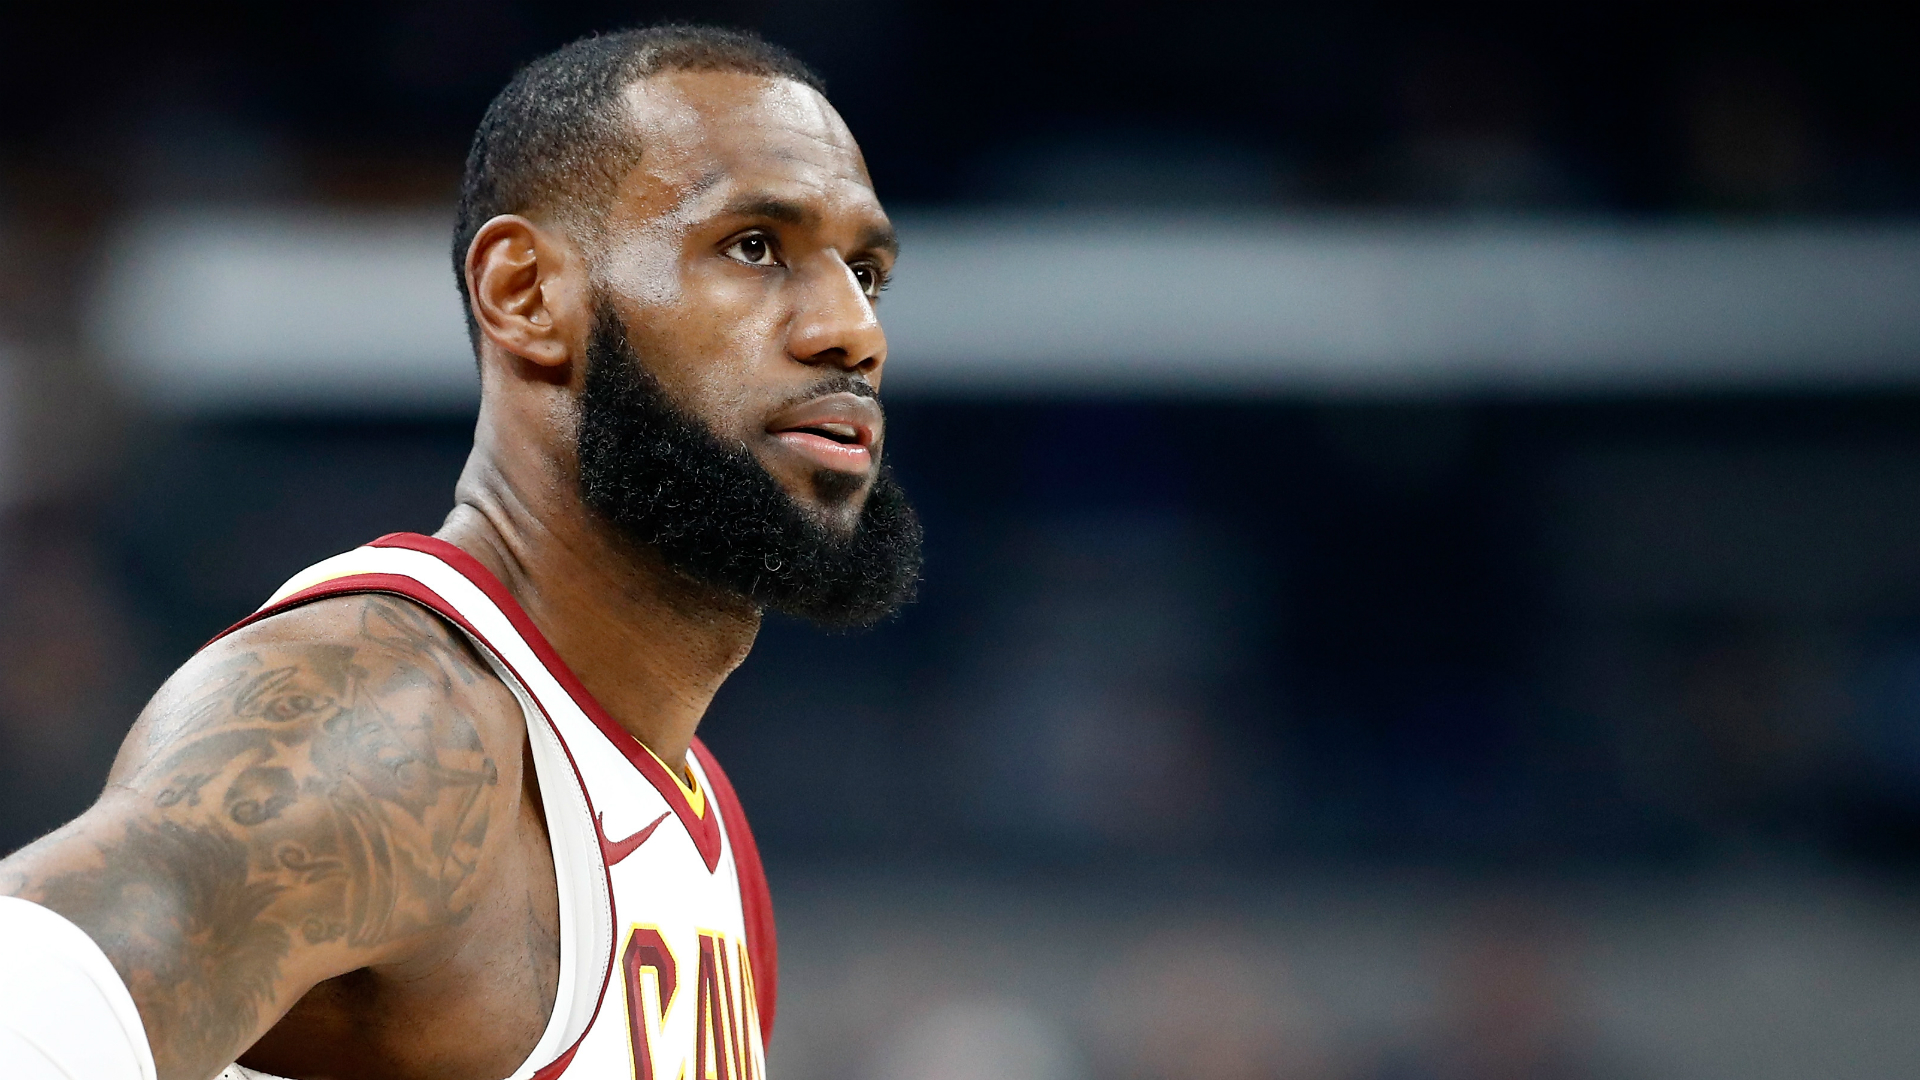 The NBA free agent market will again feature LeBron James after his reported decision to opt out of his Cleveland Cavaliers contract.